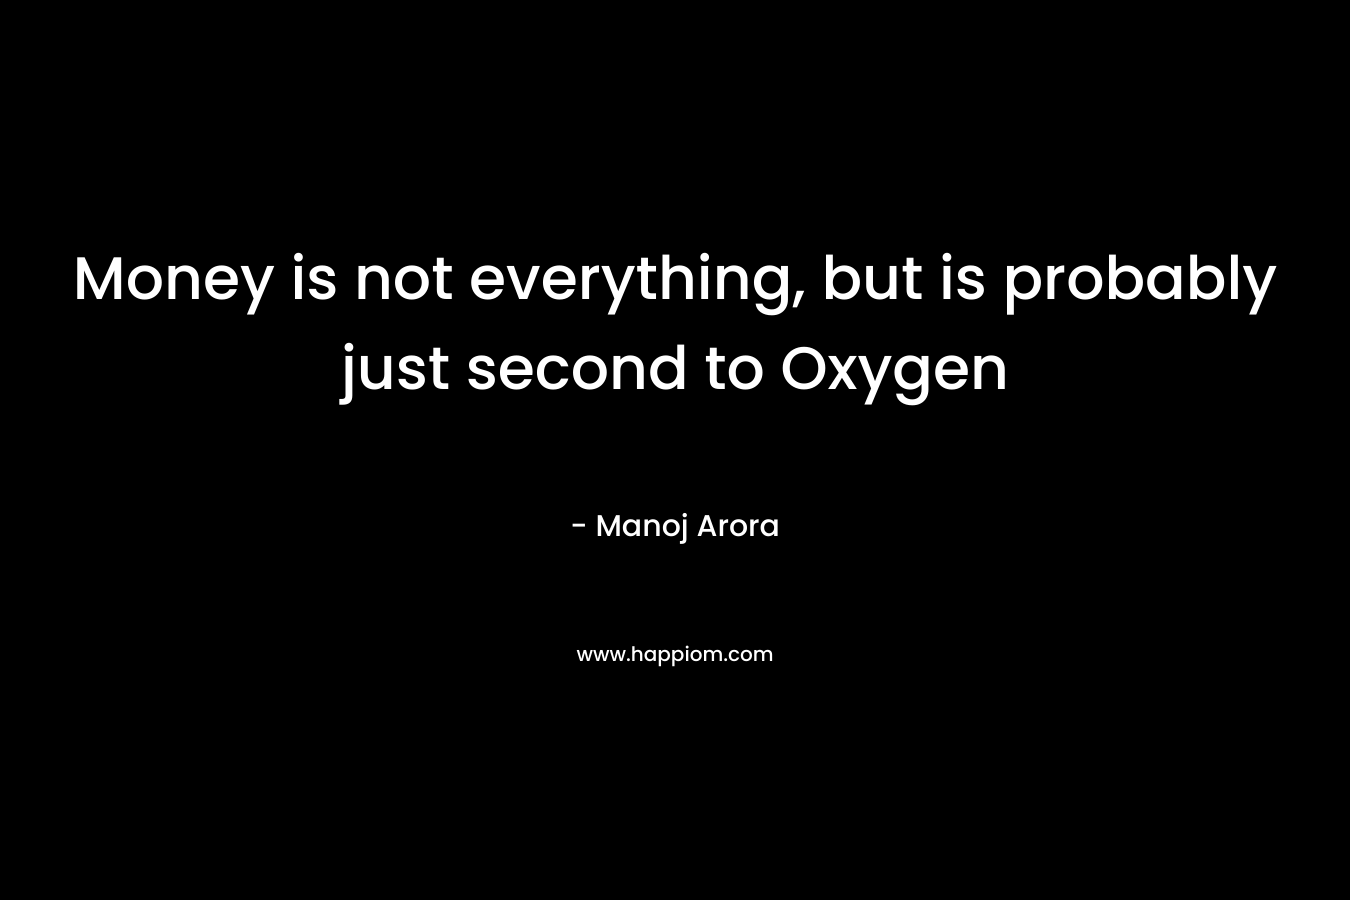 Money is not everything, but is probably just second to Oxygen